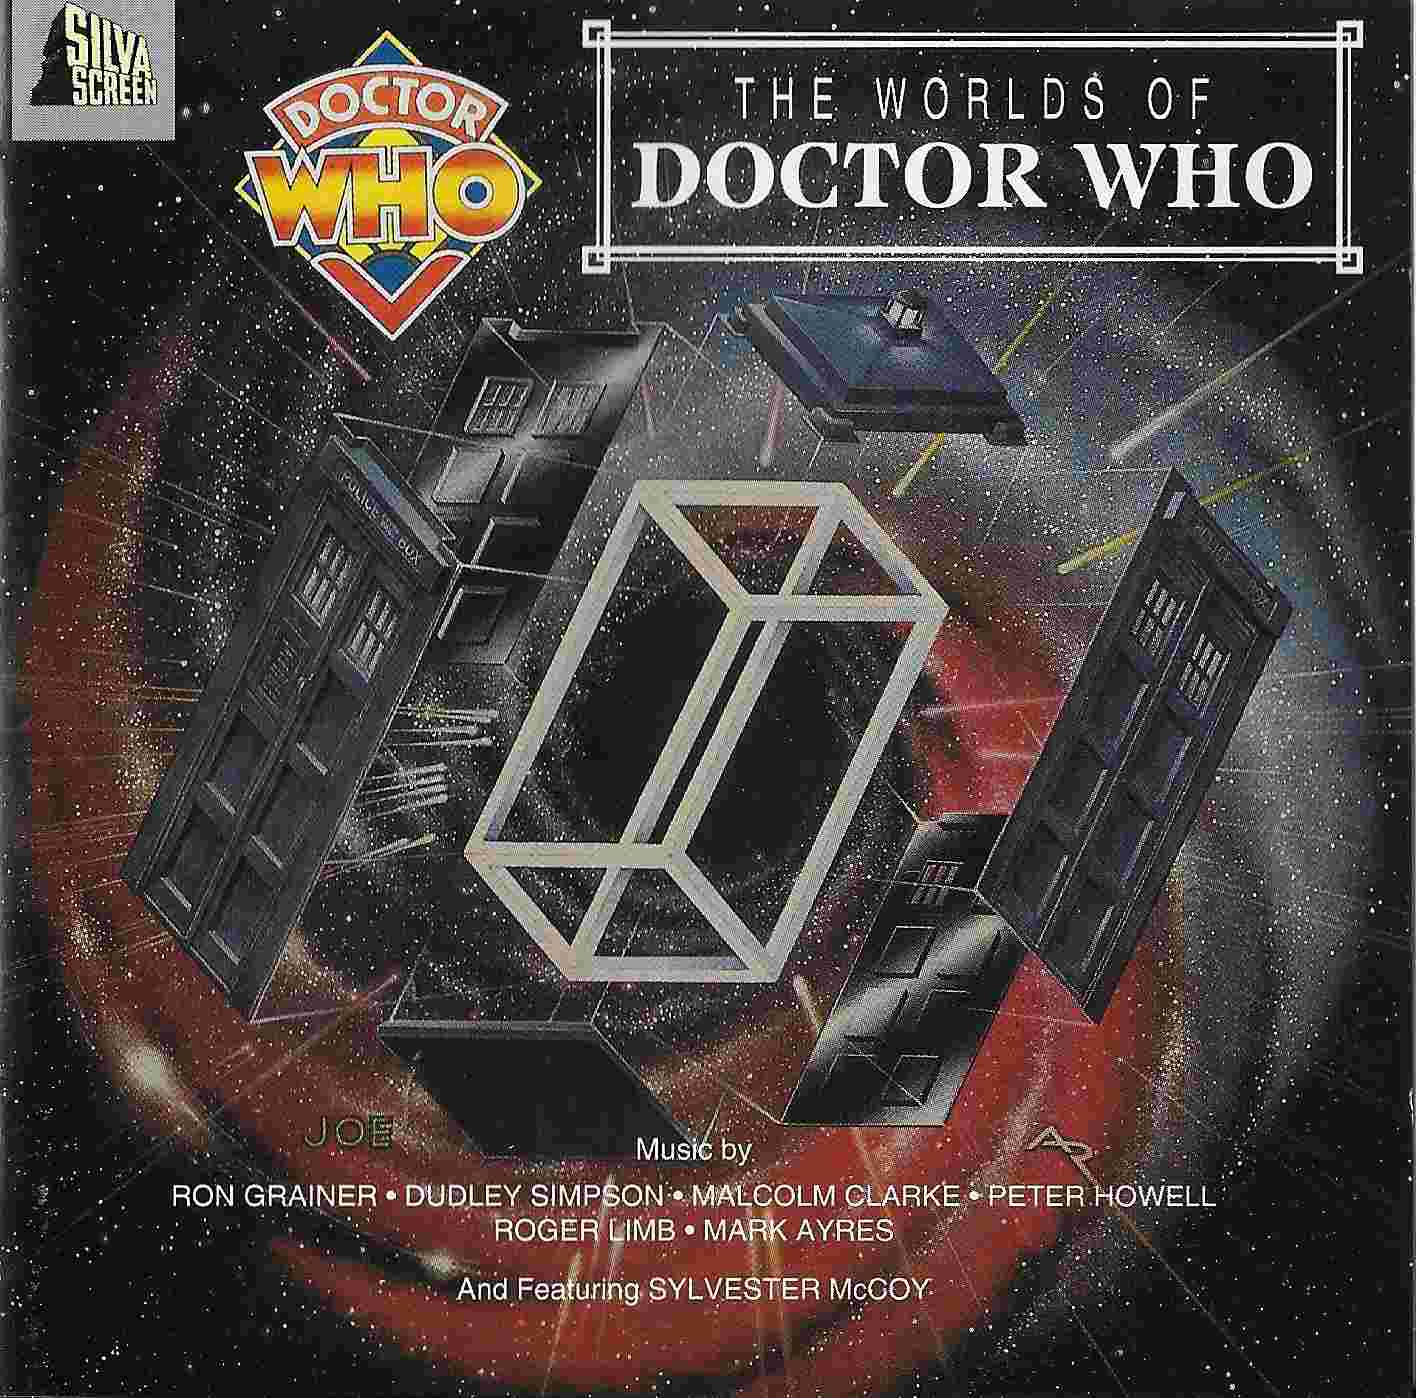 Picture of The Worlds of doctor who by artist Various from the BBC cds - Records and Tapes library